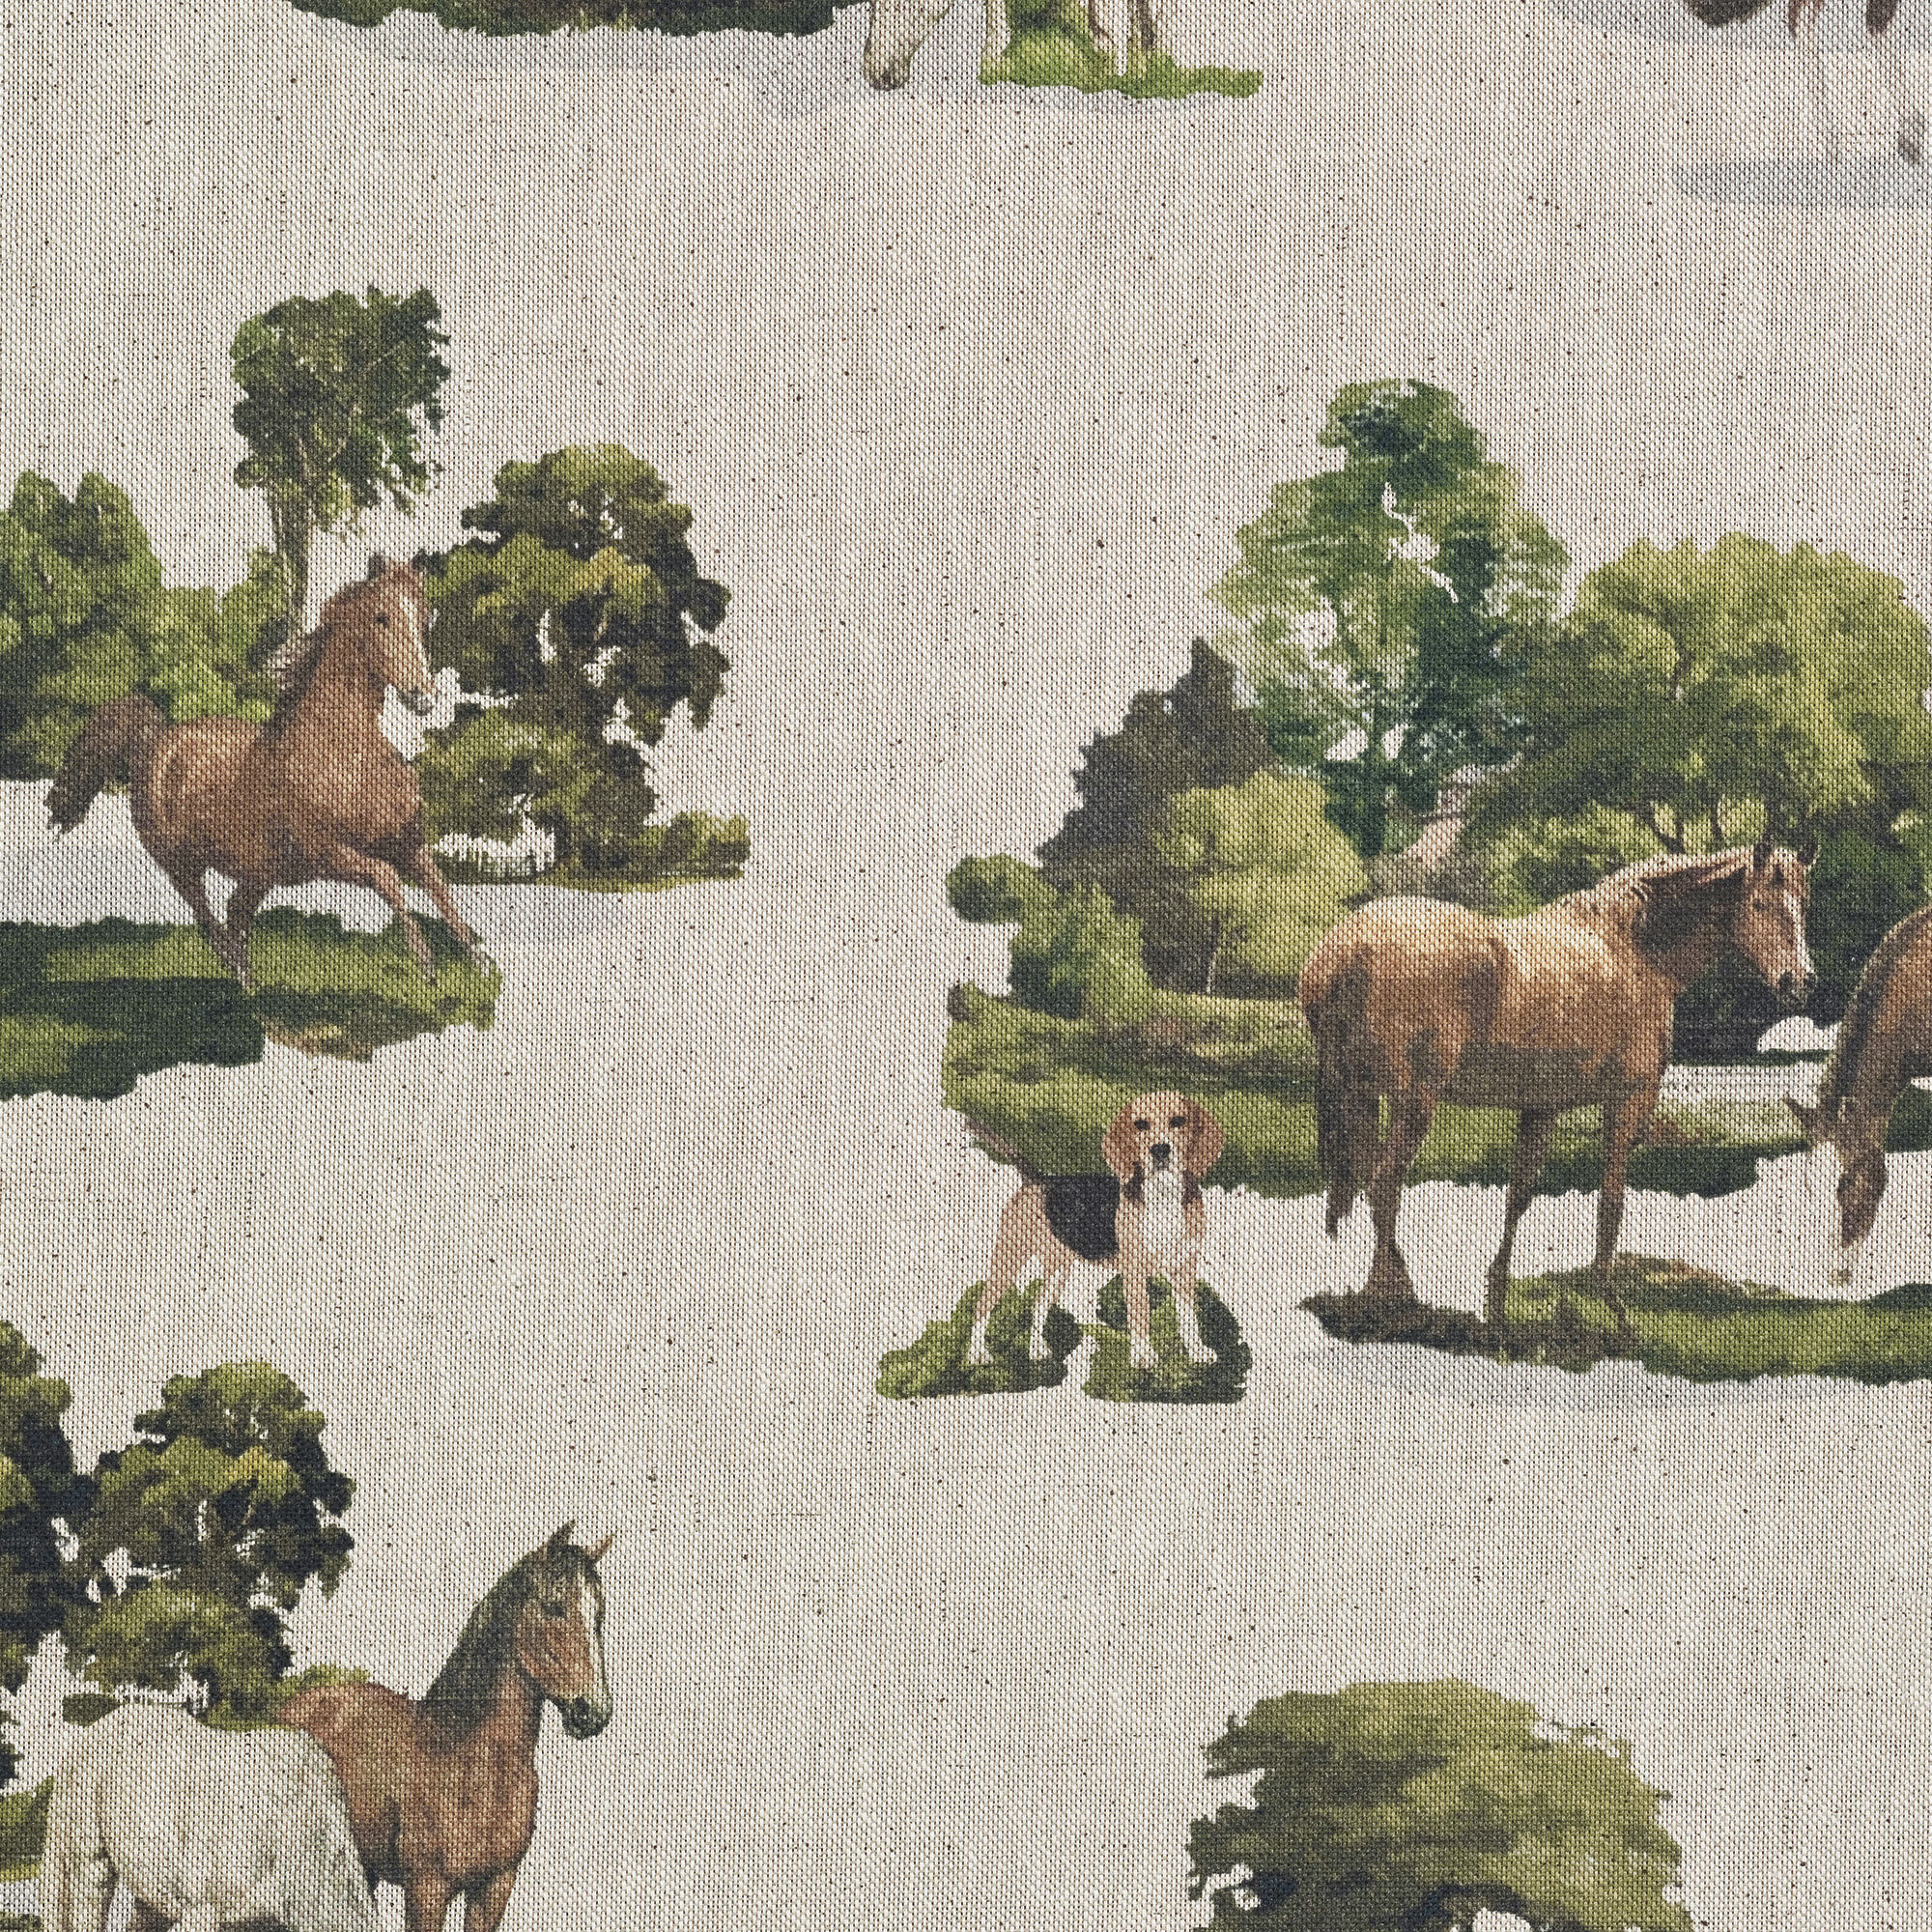 Aston - Cotton Polyester Blend Upholstery Fabric by the Yard